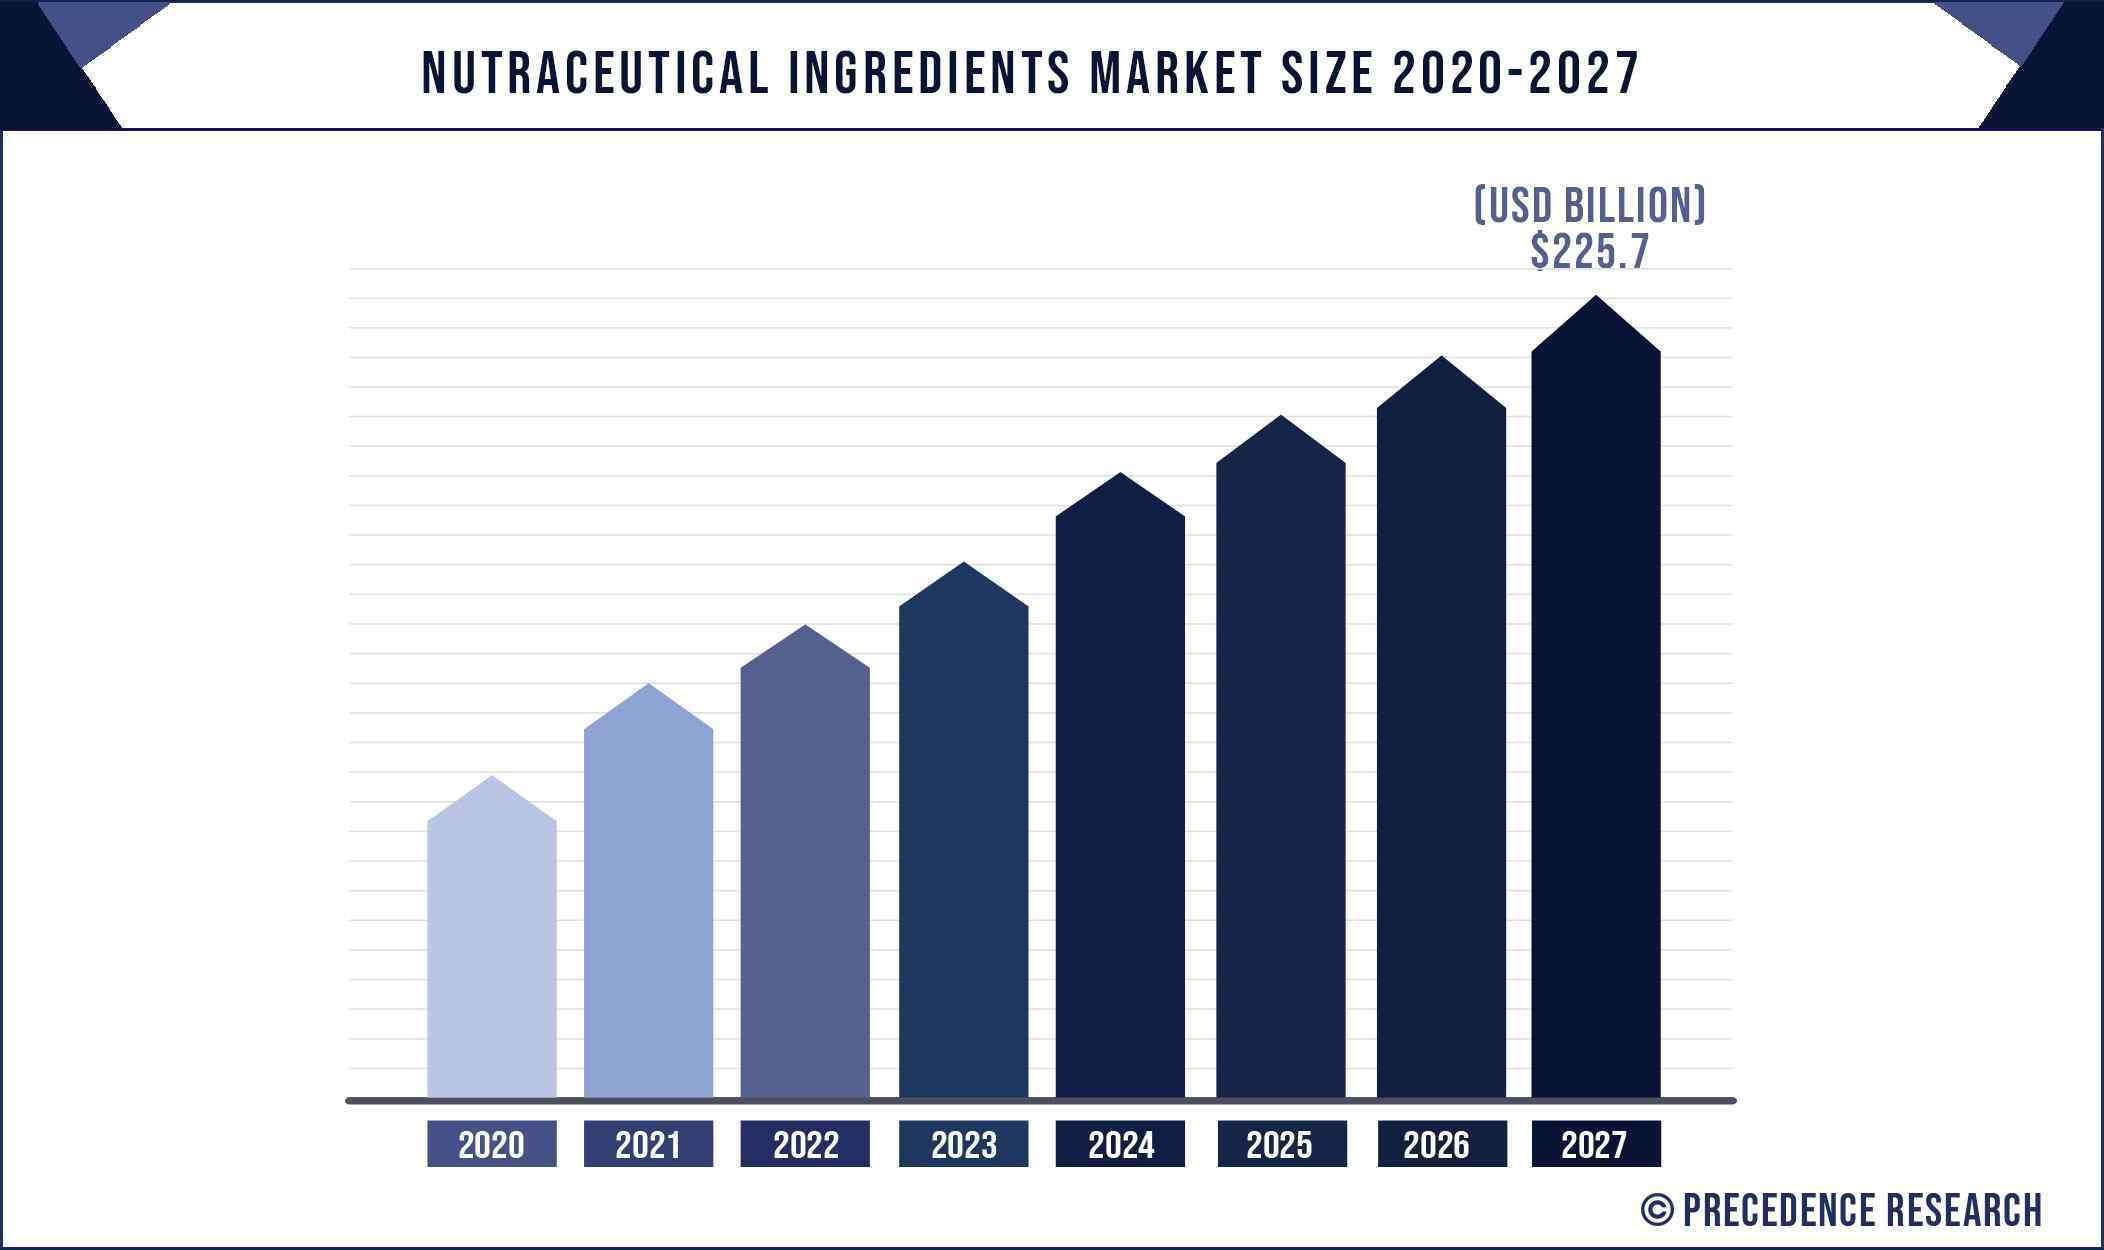 Nutraceutical Ingredients Market Size 2020 to 2027